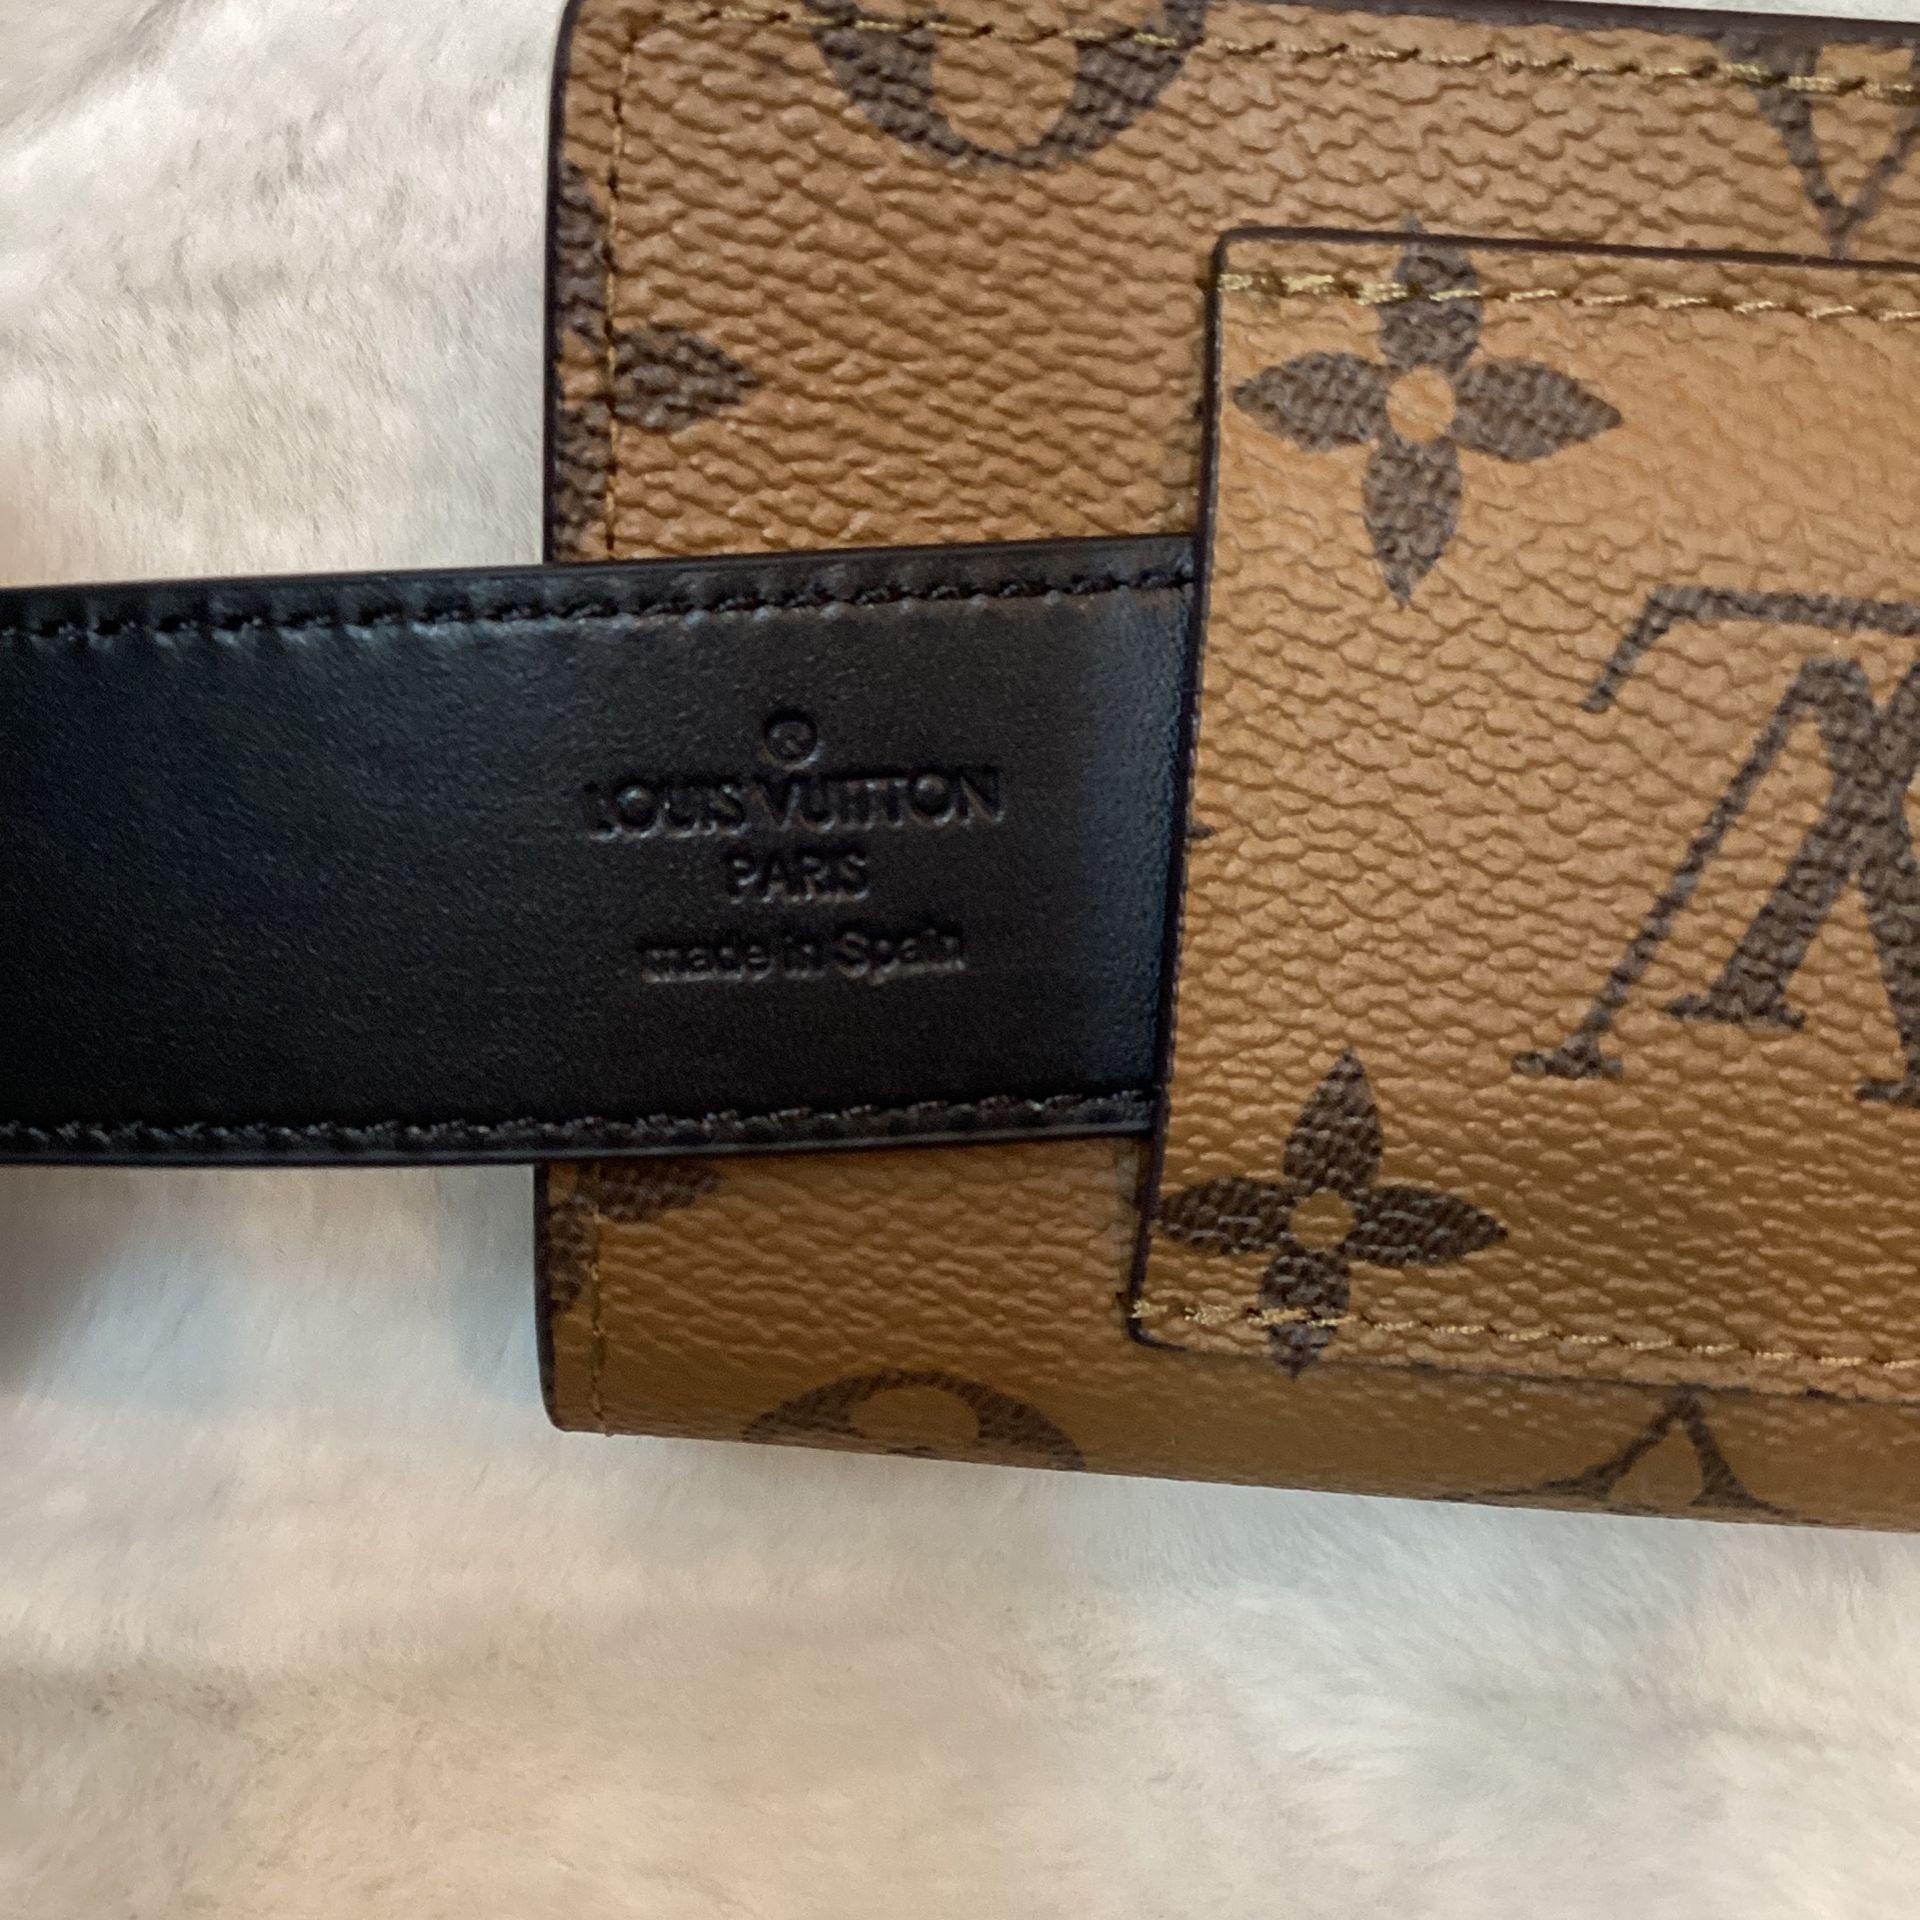 Louis Vuitton  Belt Pouch  And Keychain 